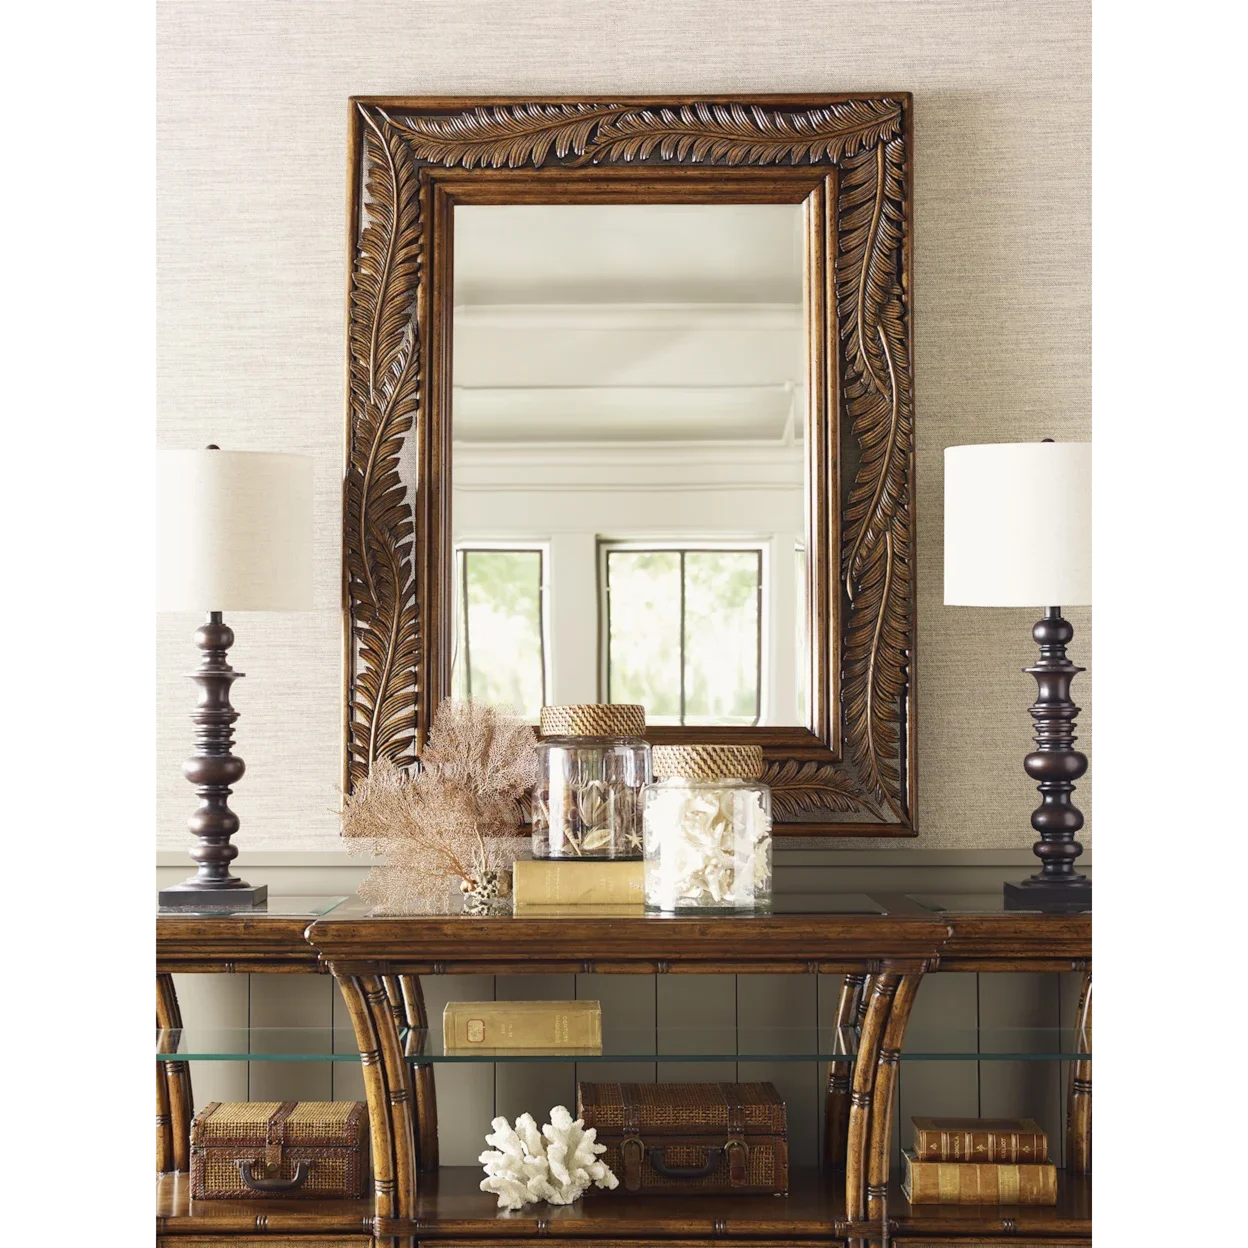 Tommy Bahama wall mirror with a tropical pattern wood frame. 